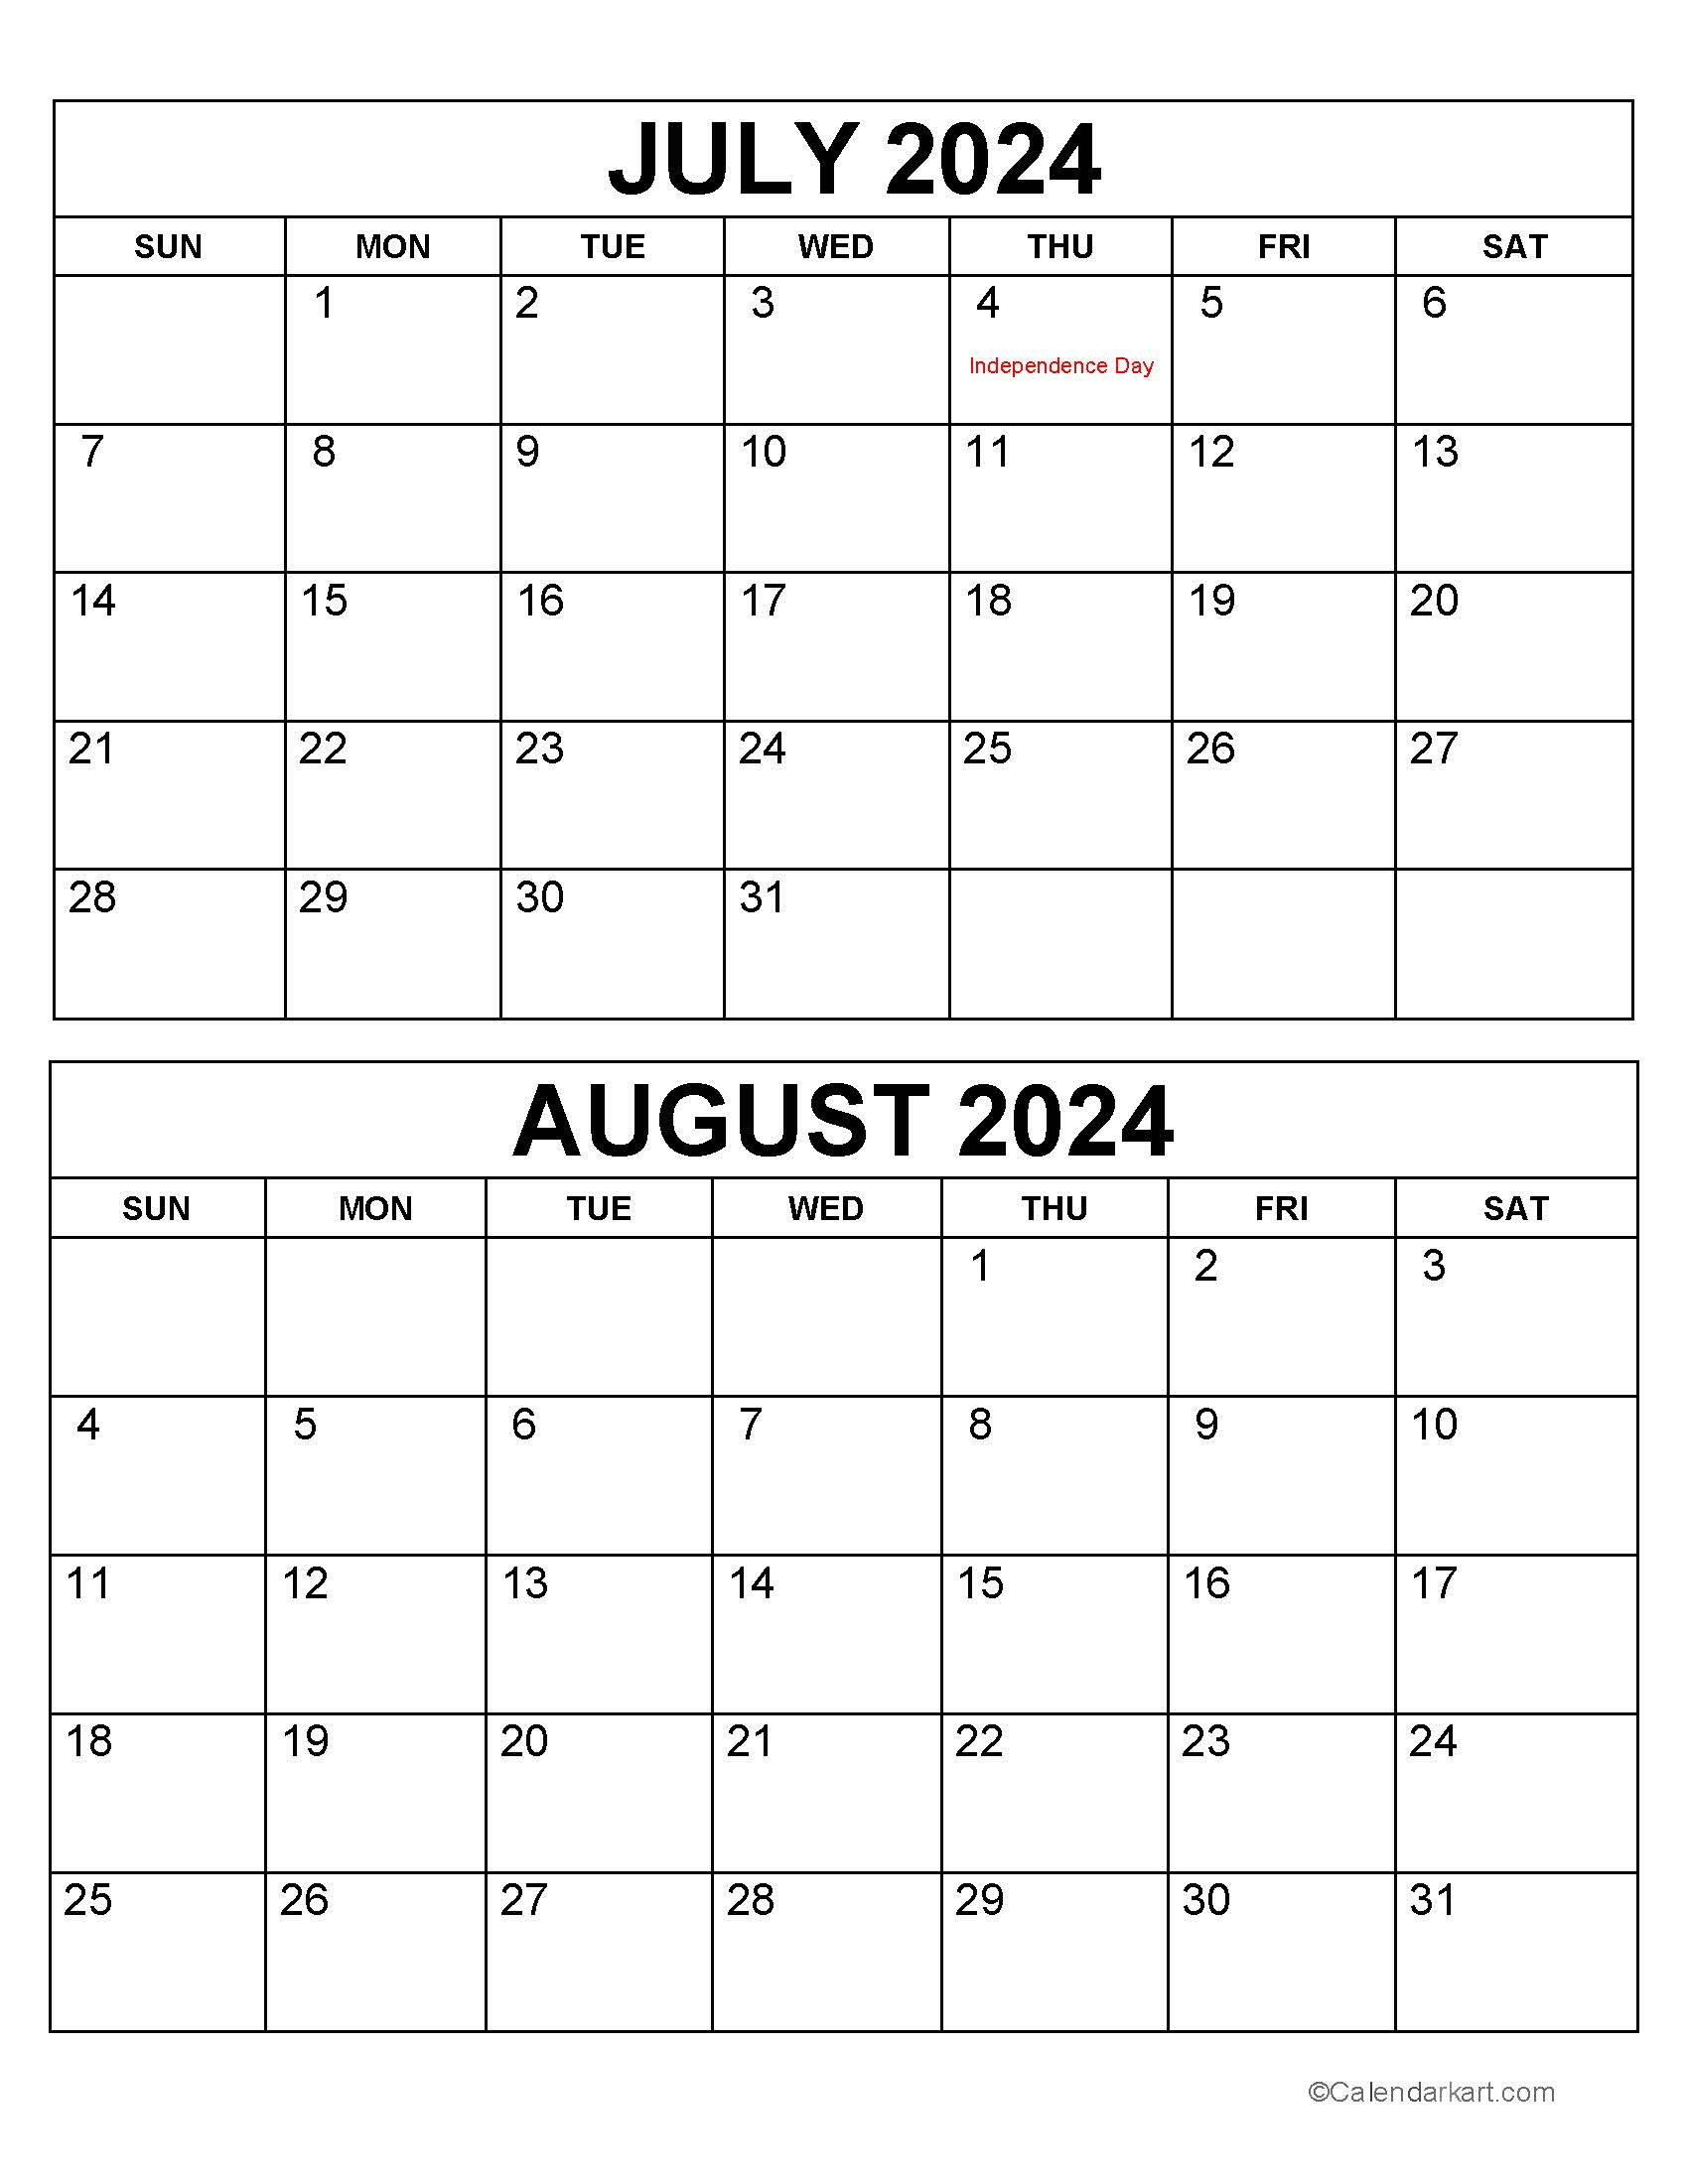 Printable July August 2024 Calendar | Calendarkart in Calendar For The Month Of July And August 2024